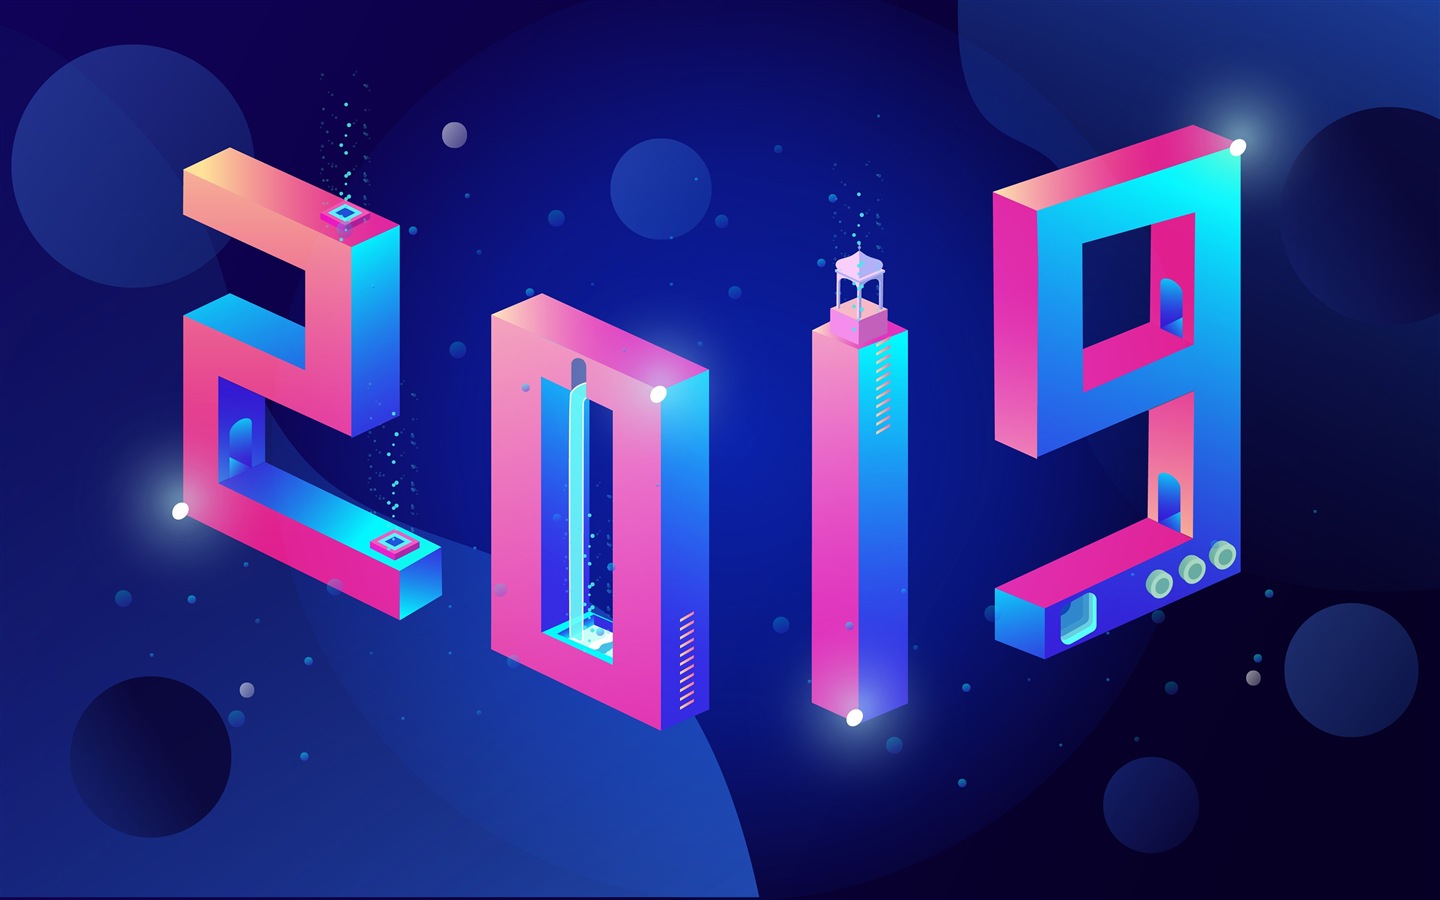 Happy New Year 2019 HD wallpapers #1 - 1440x900